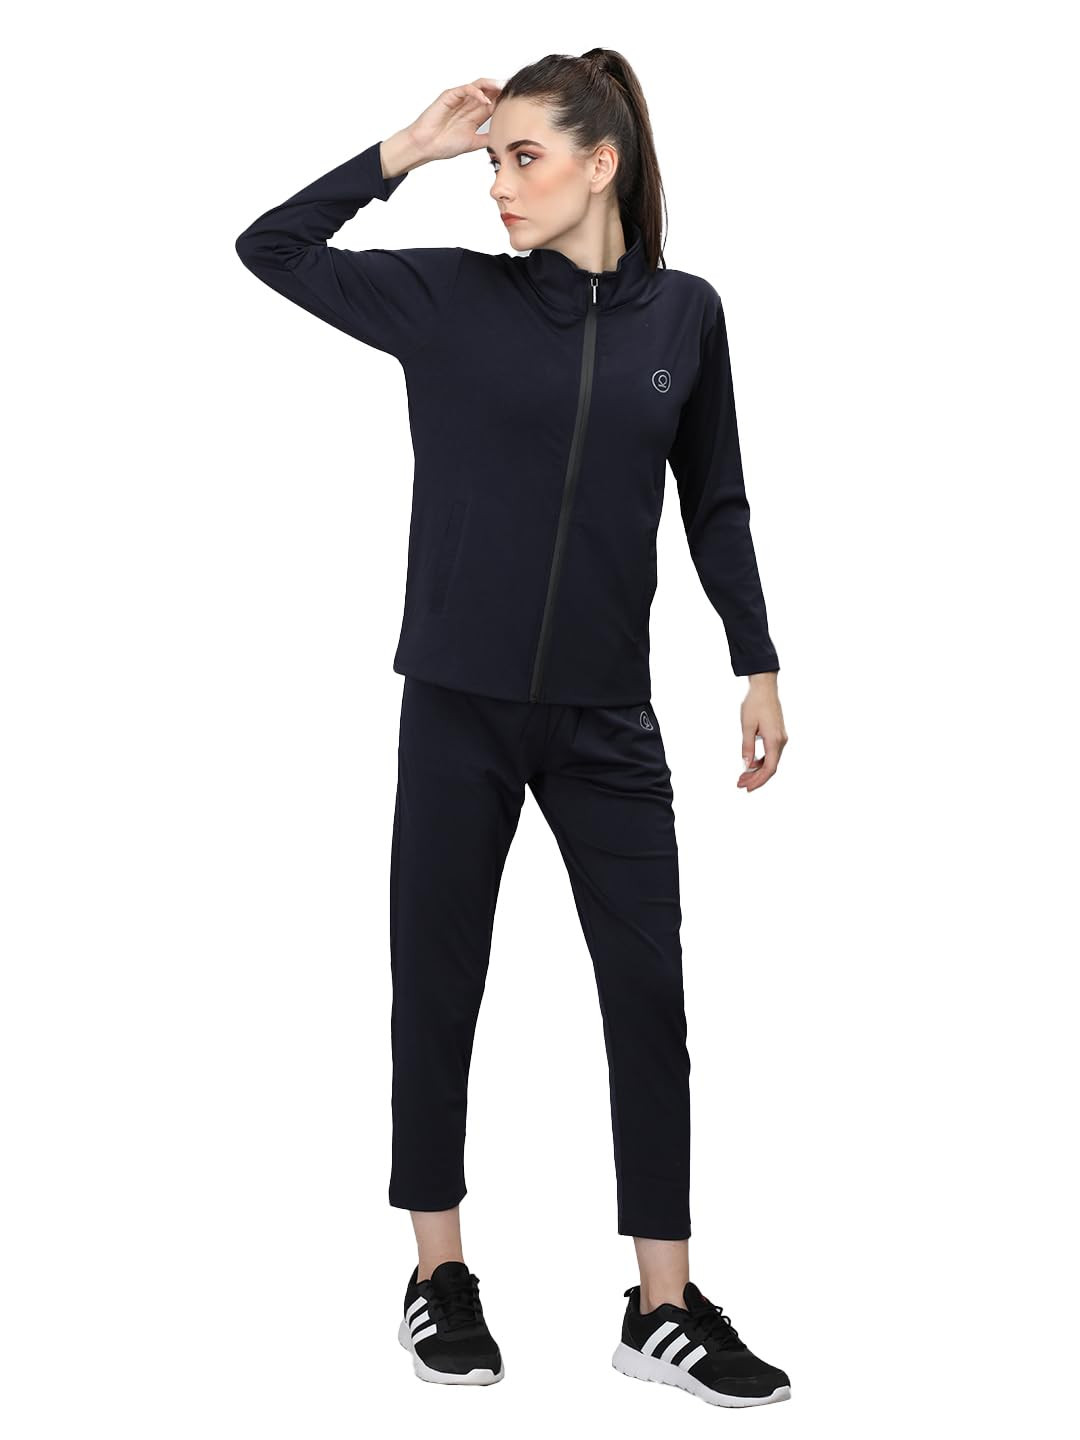 WINTER TRACKSUIT FOR WOMEN,HOOD TRACK SUIT, WINTER TOP AND BOTTOM SET,  ACTIVE WEAR TRACKSUIT